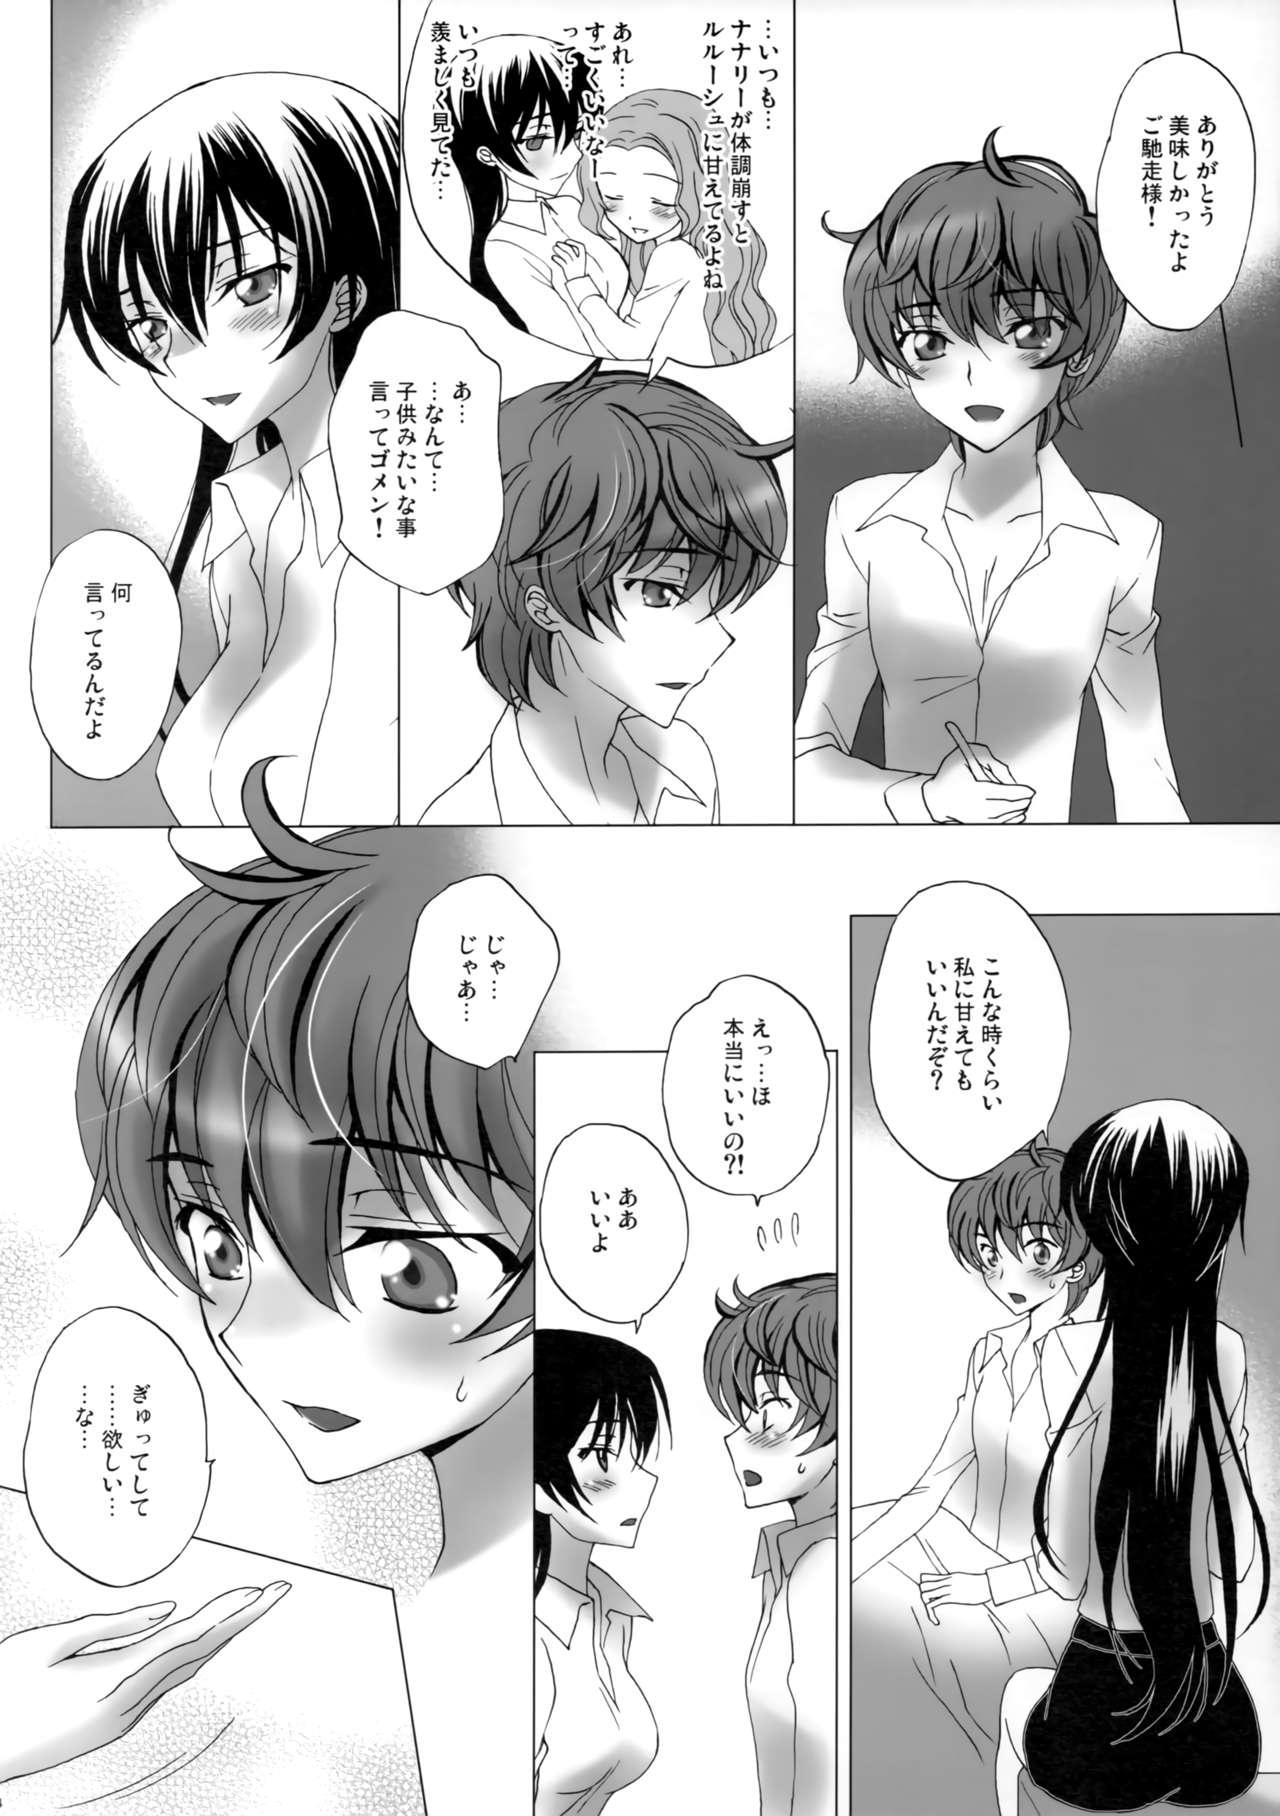 Sixtynine Love Bless - Code geass Gay Boys - Page 3